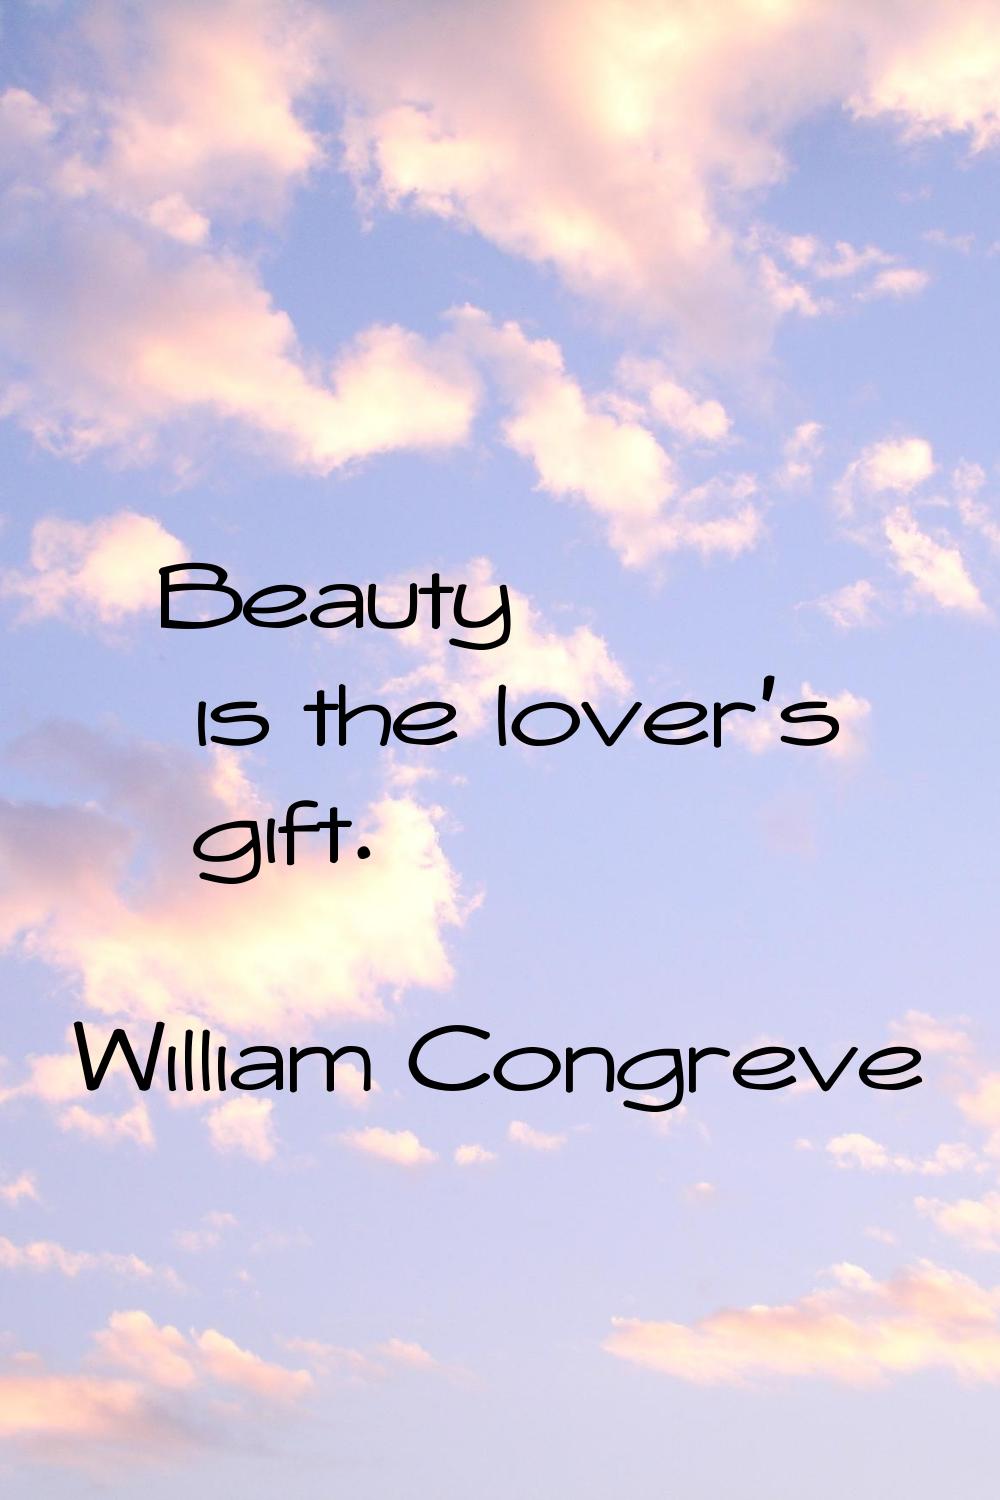 Beauty is the lover's gift.